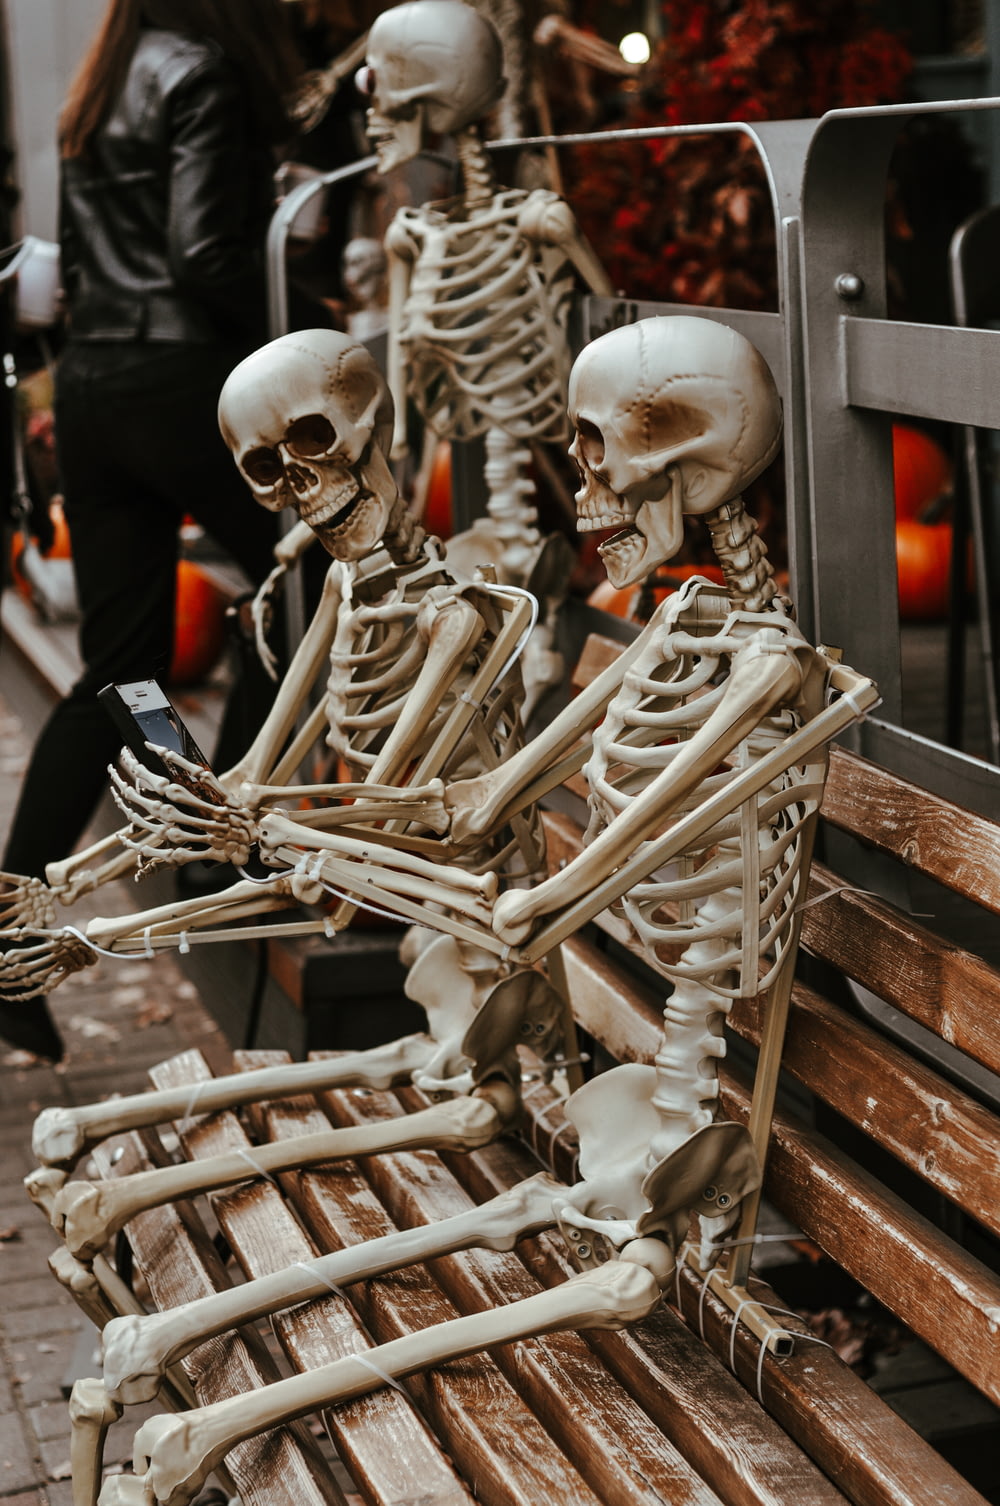 a couple of skeletons sitting on top of a wooden bench